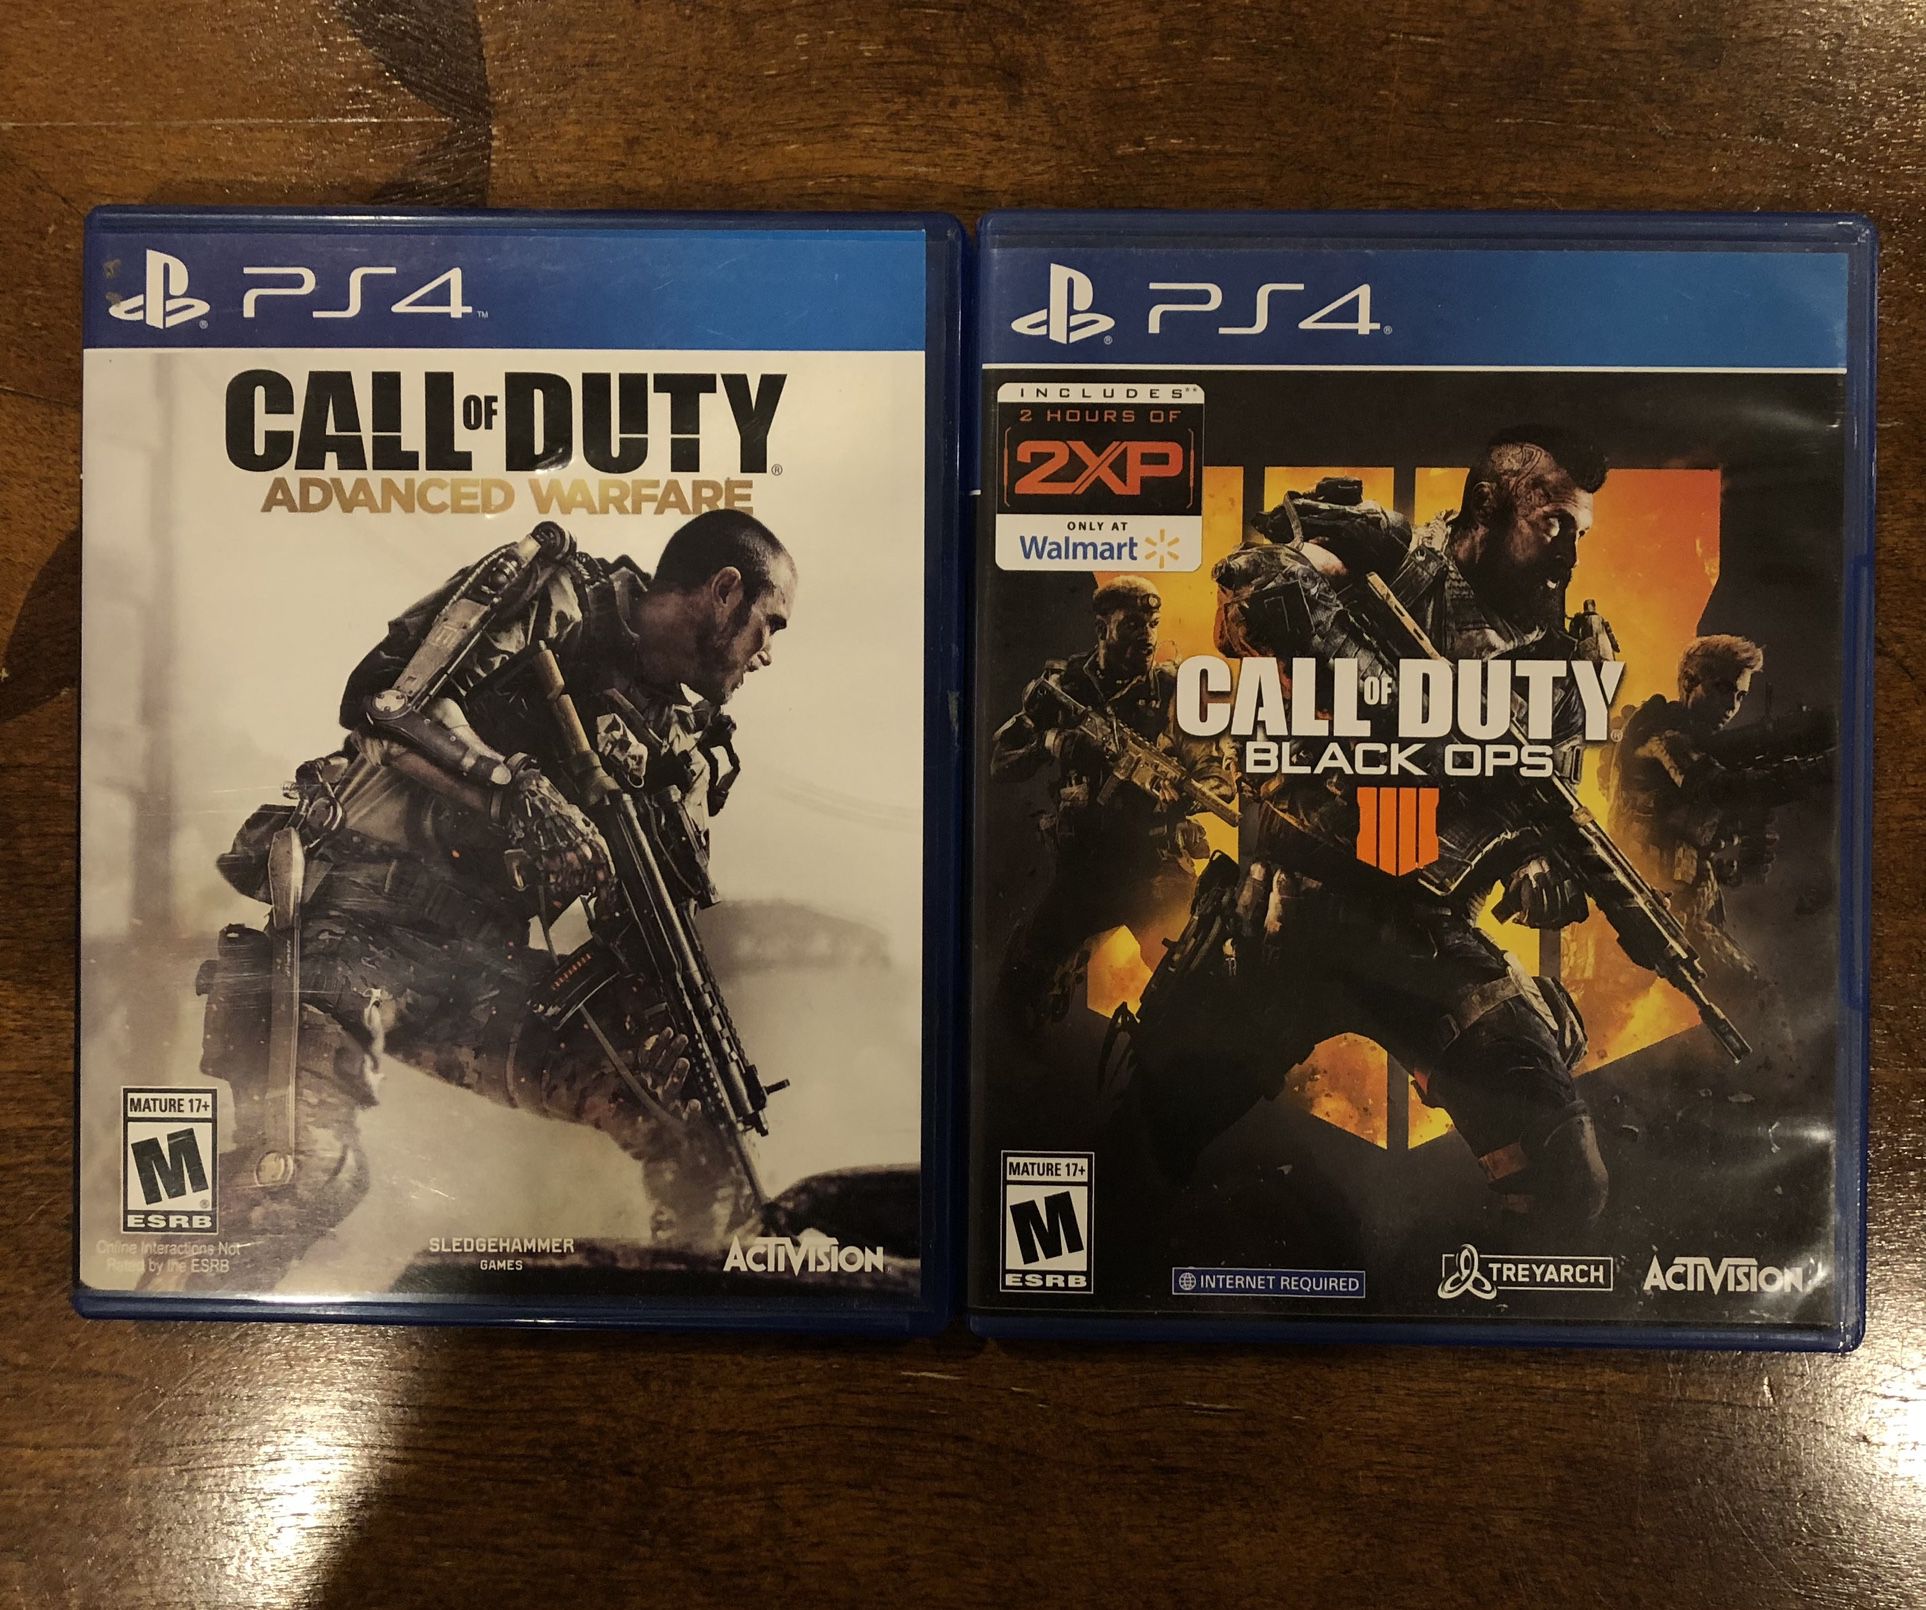 Call Of Duty Games For PS4